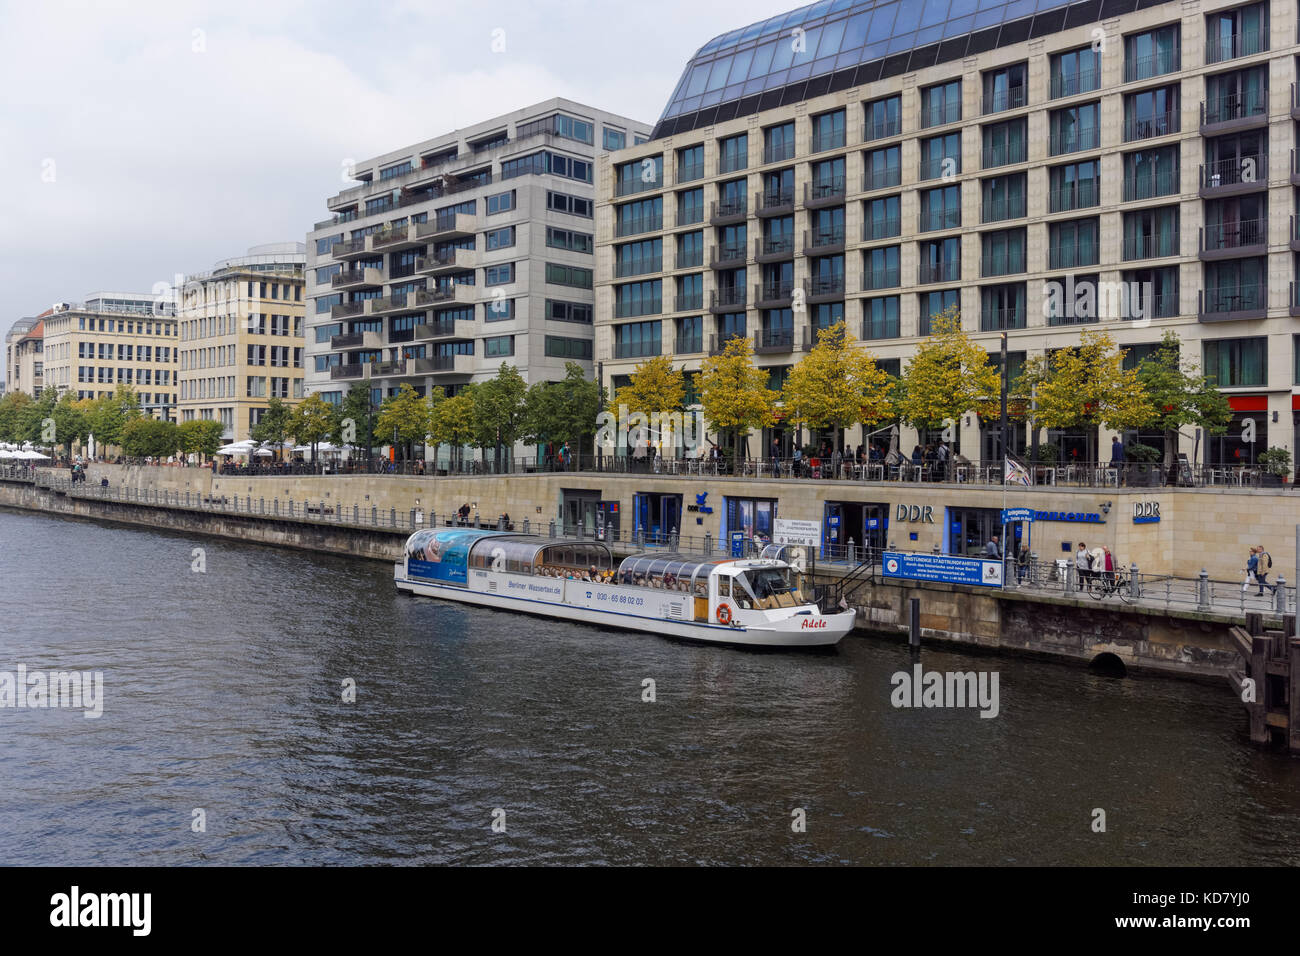 Cruise boat on the River Spree near DDR Museum in Berlin, Germany Stock Photo